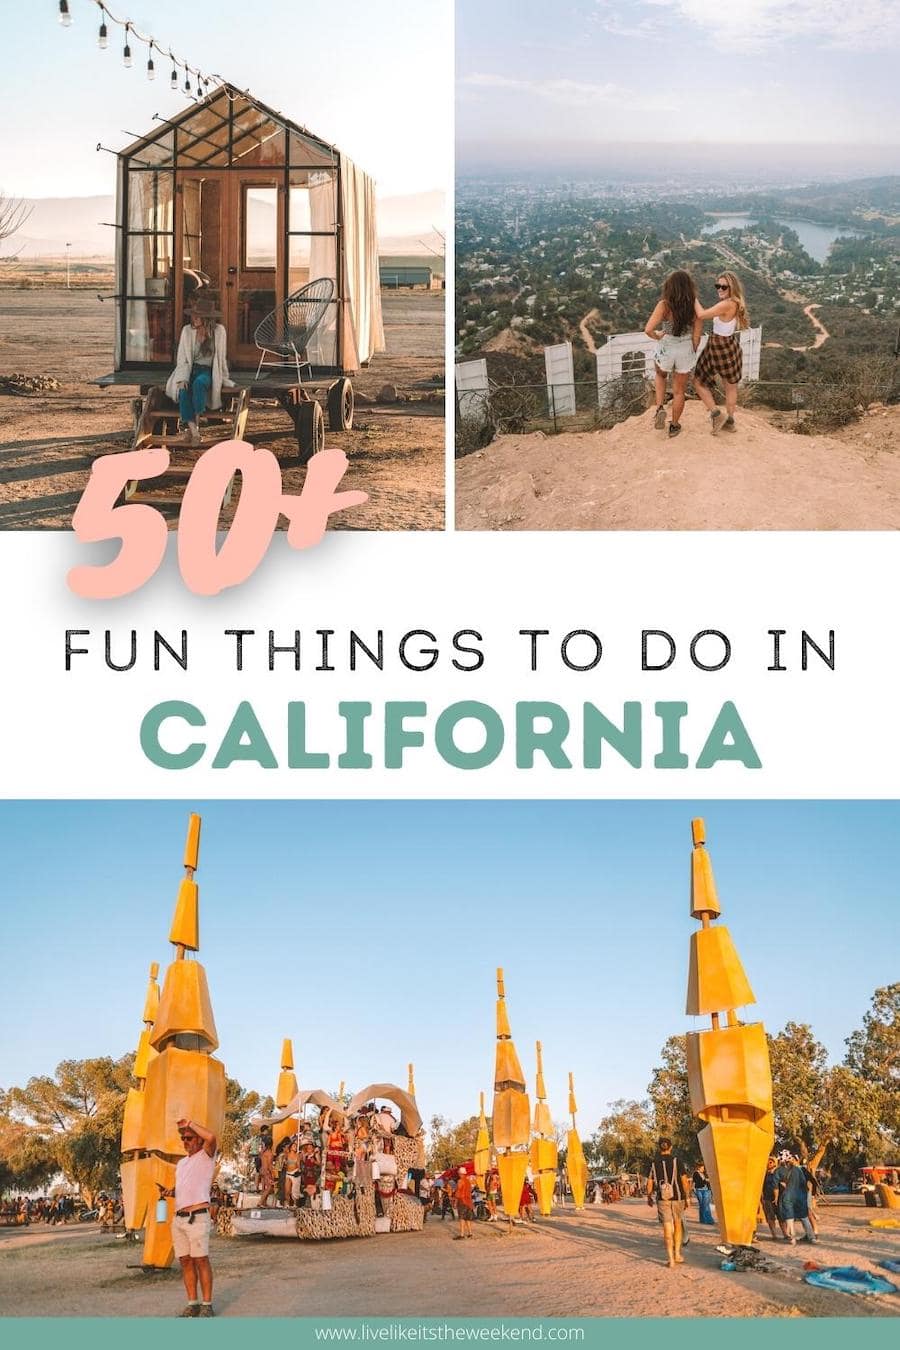 Pin cover for blog post on 50+ fun things to do in California